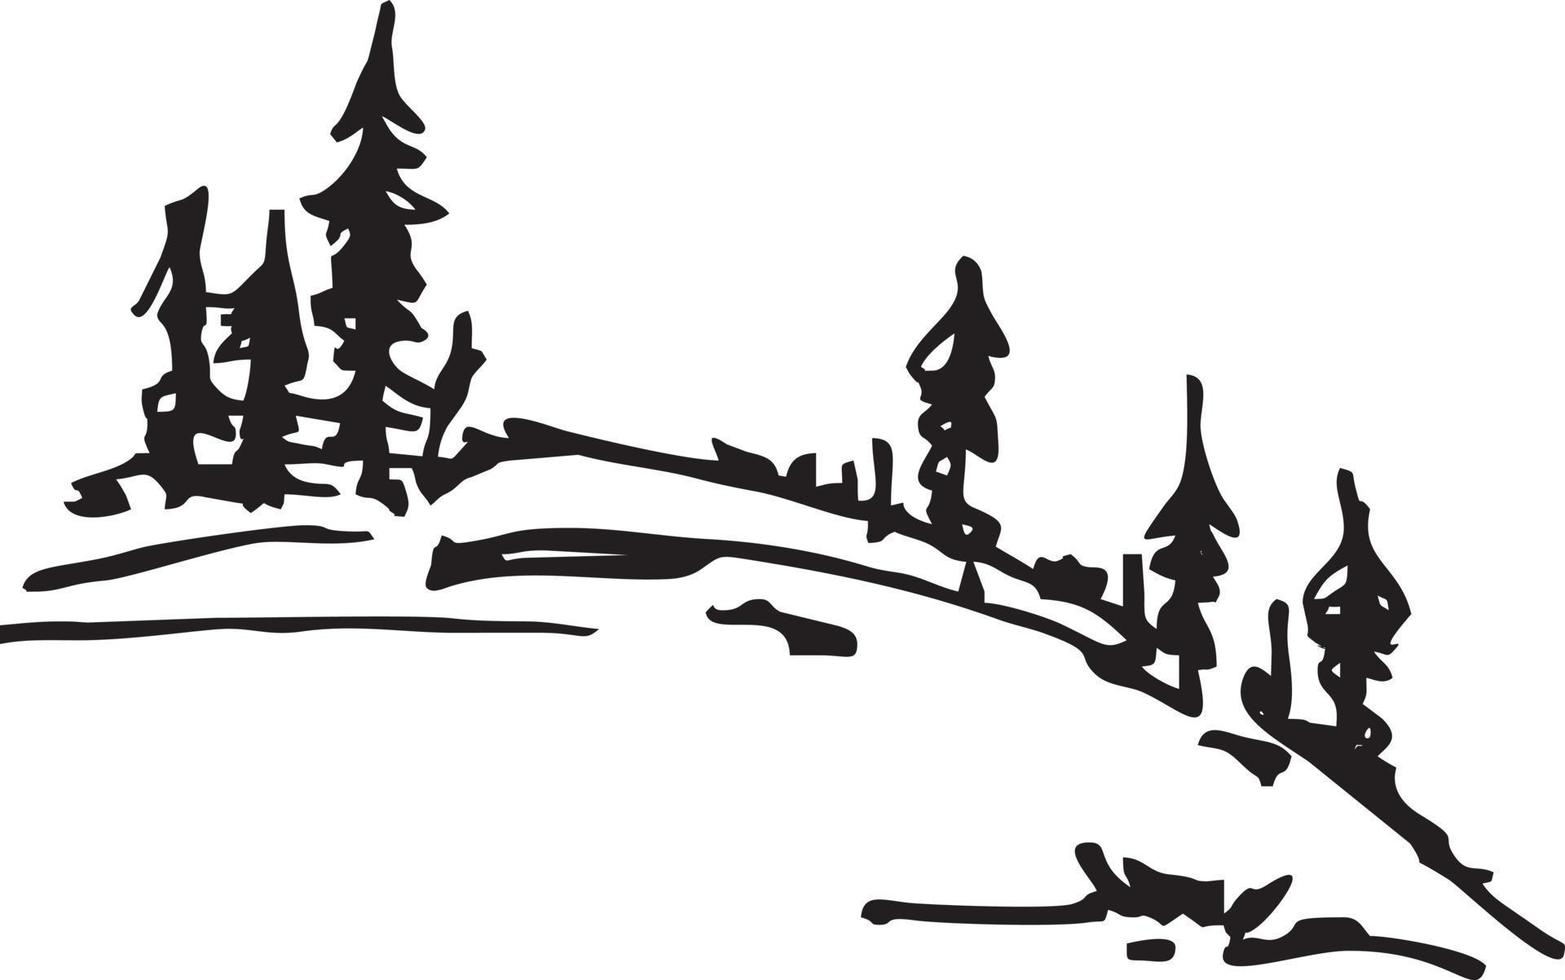 Coniferous trees on the hill sketch. Spruce or pine trees on a hill silhouette Black and white natural landscape. Good for logo, illustration, print on clothes vector